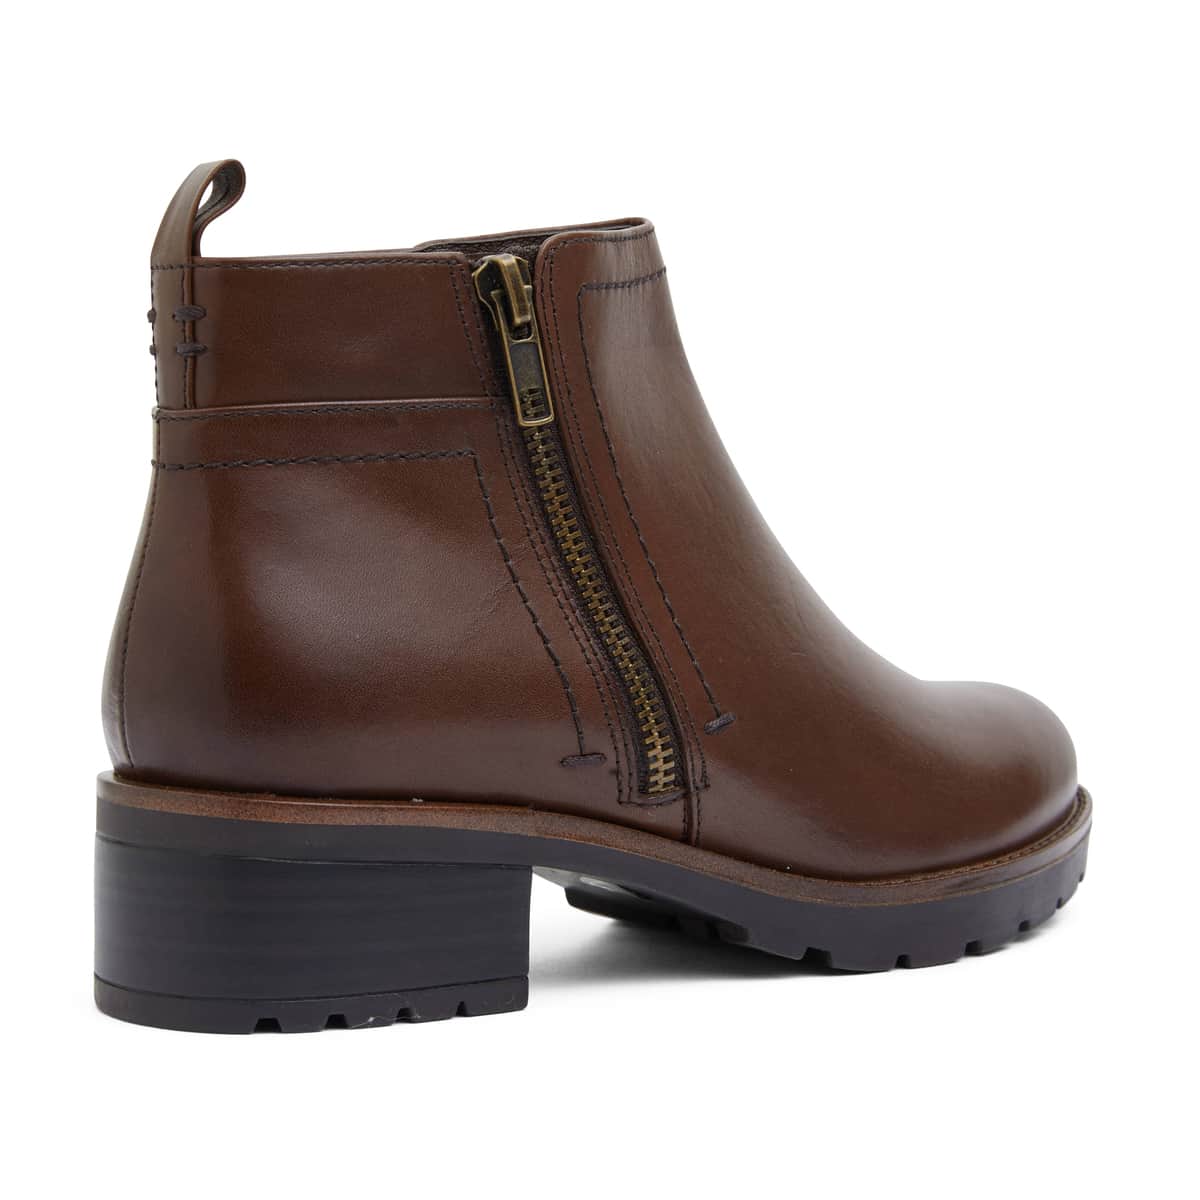 Ibis Boot in Brown Leather